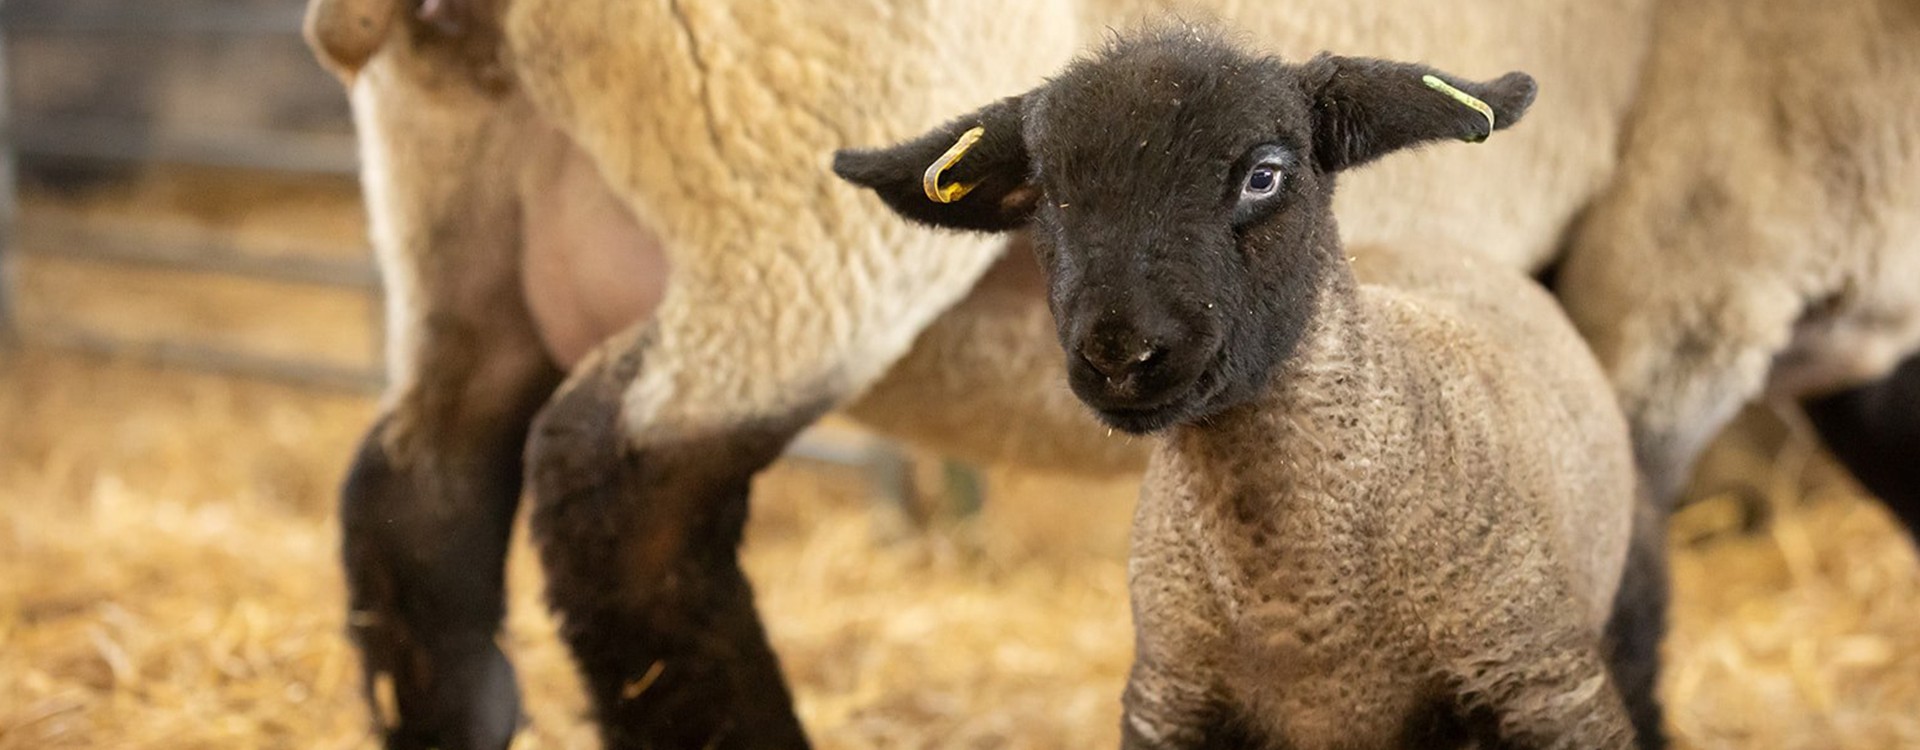 Welcome to Lambing Season at the Farm